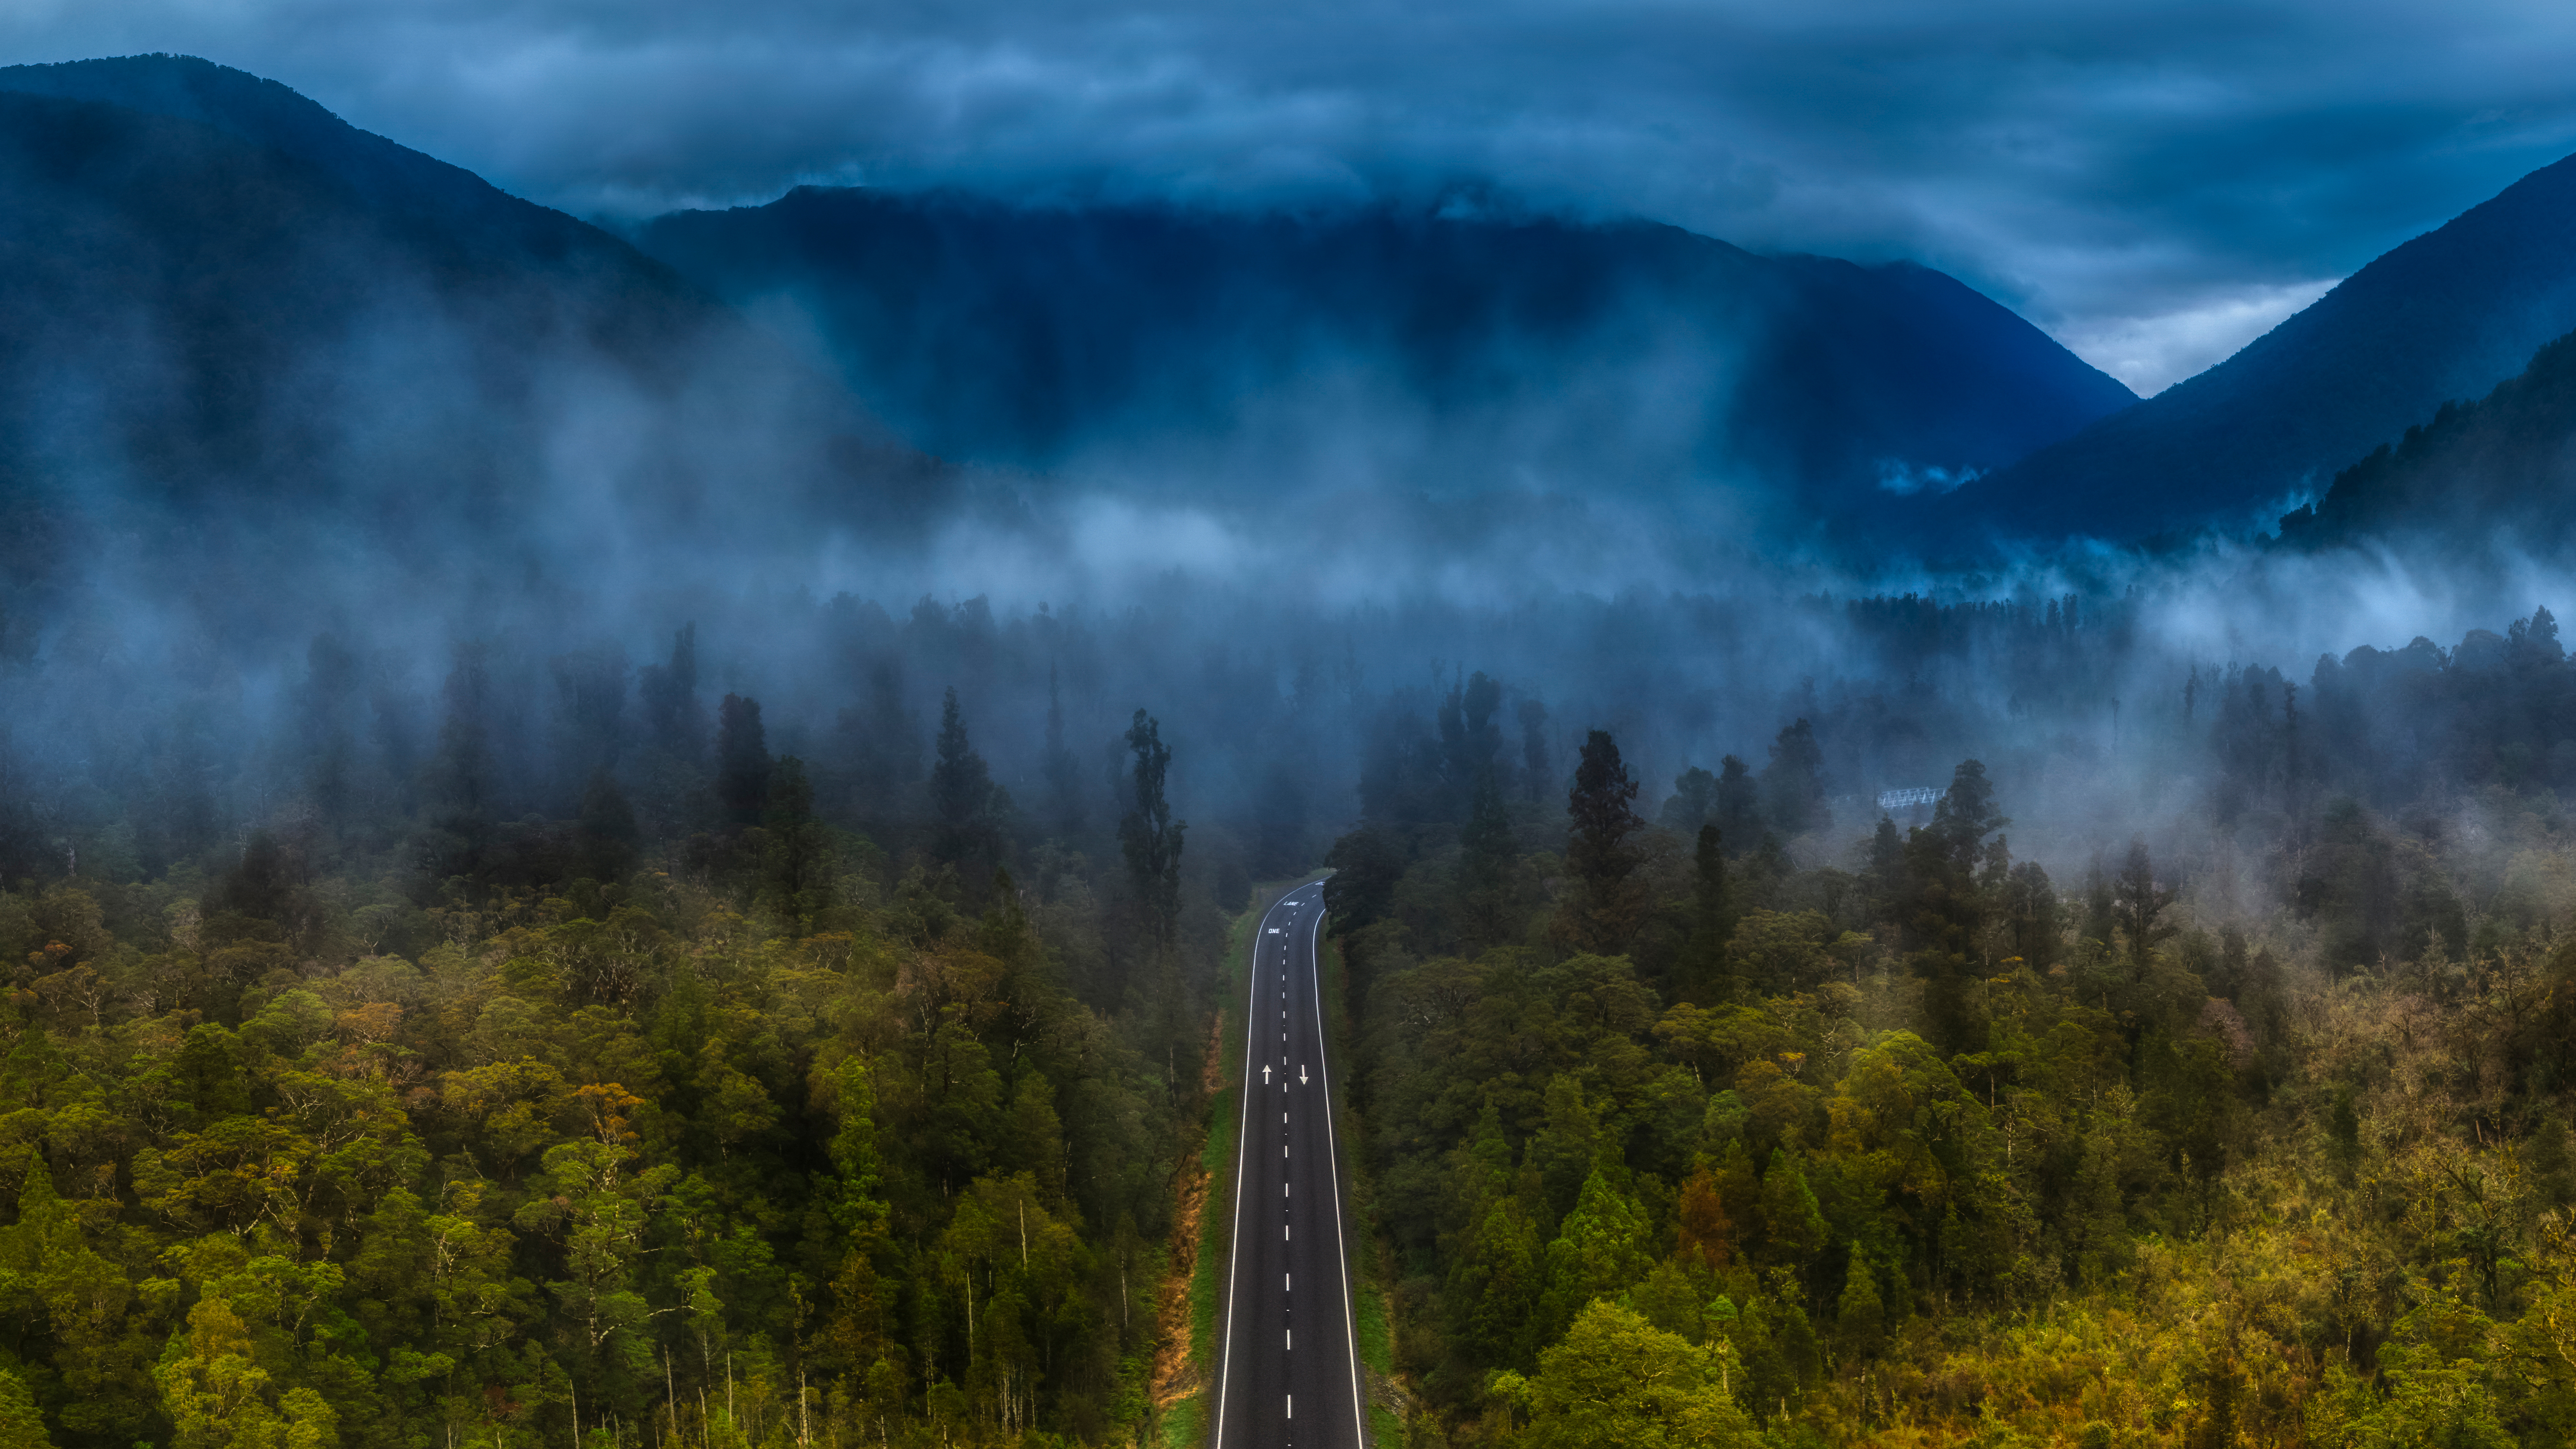 General 7680x4320 photography Trey Ratcliff landscape New Zealand forest mountains mist road